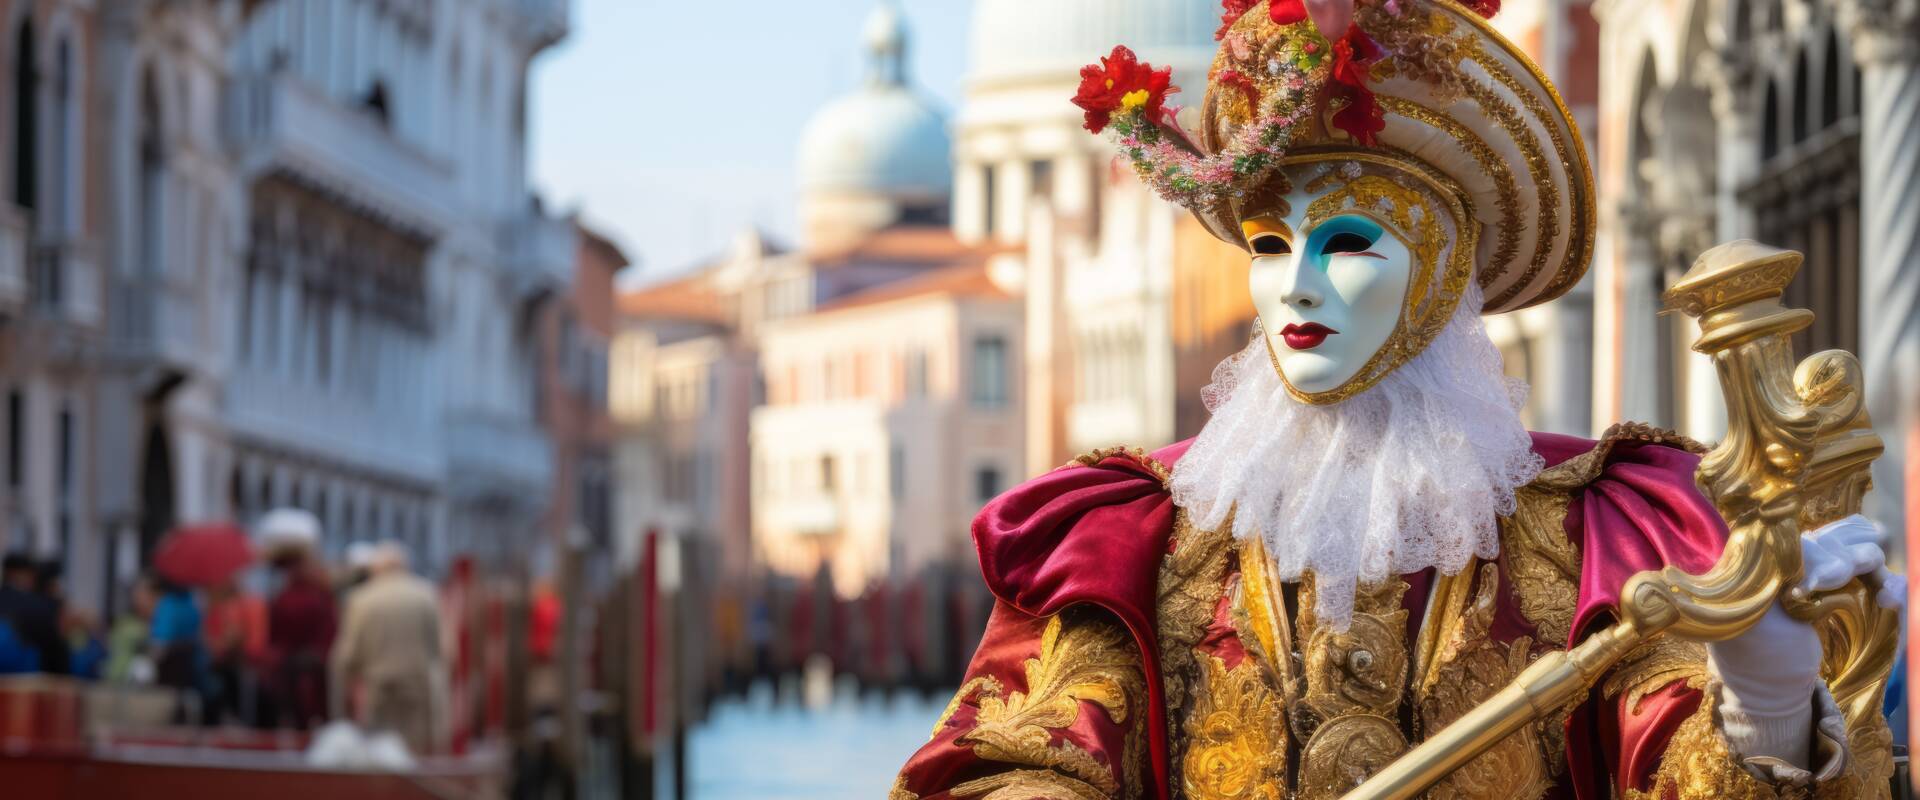 Italy's Carnival traditions from Venice to Florence